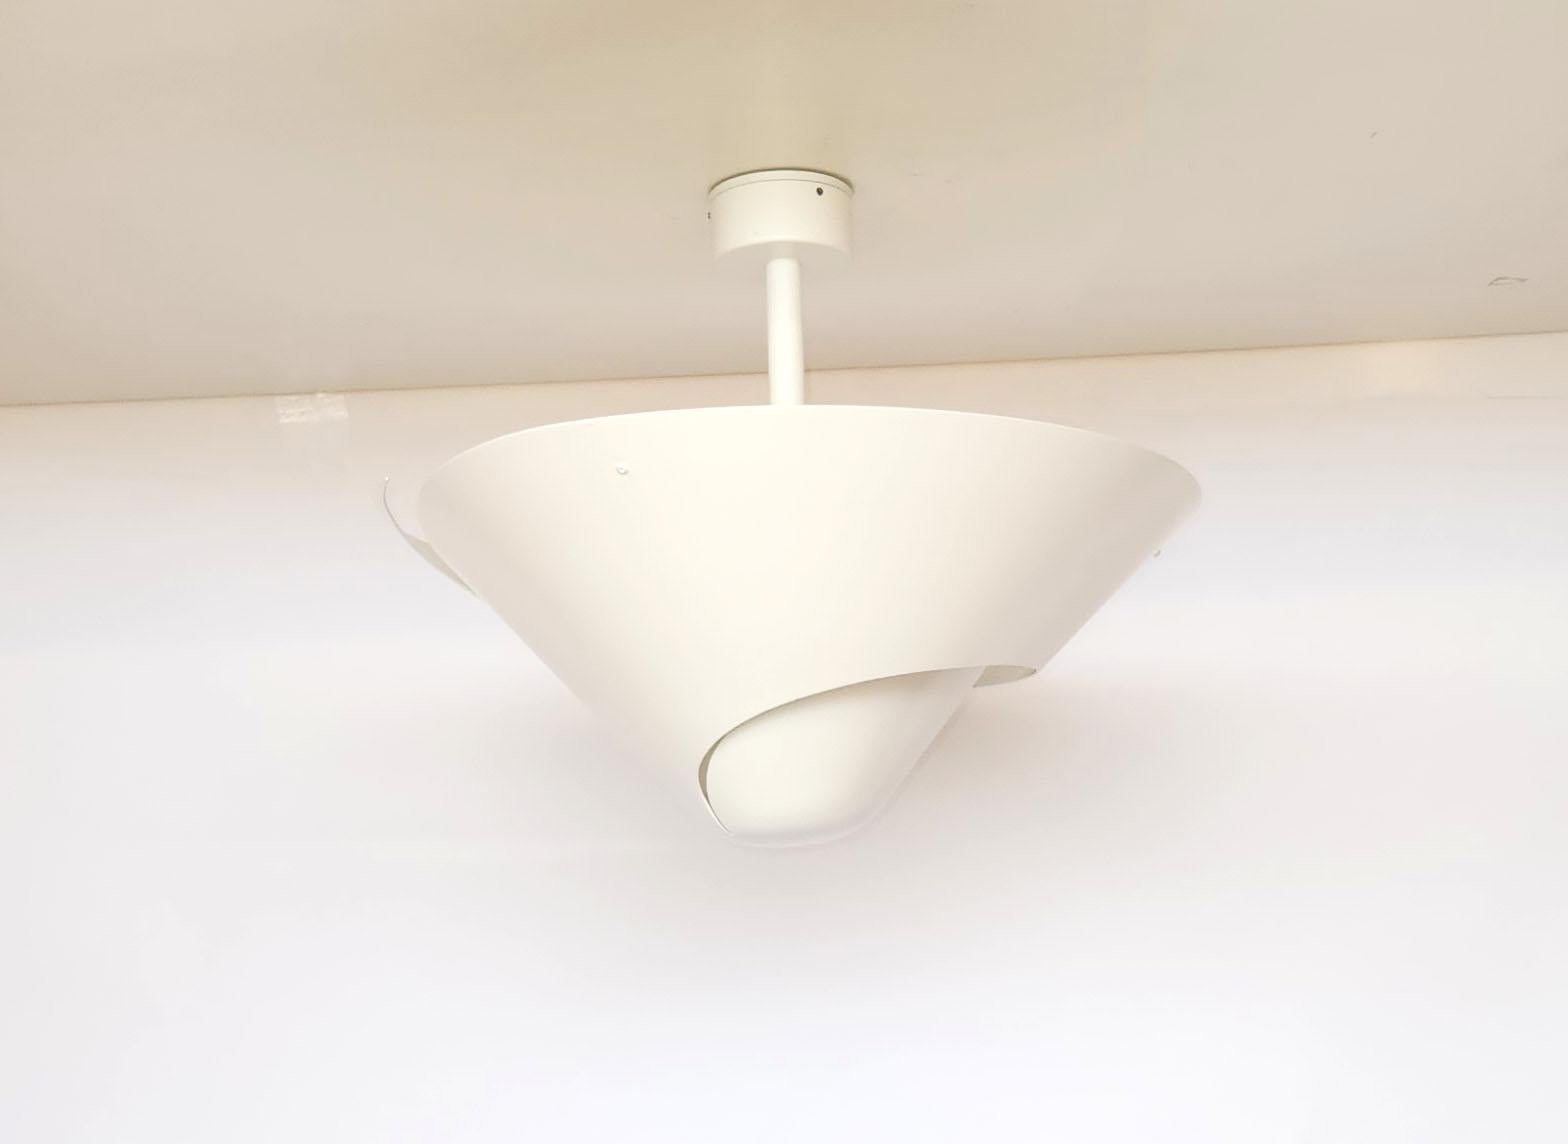 Serge Mouille - Small Snail Ceiling Lamp in White In New Condition For Sale In Stratford, CT